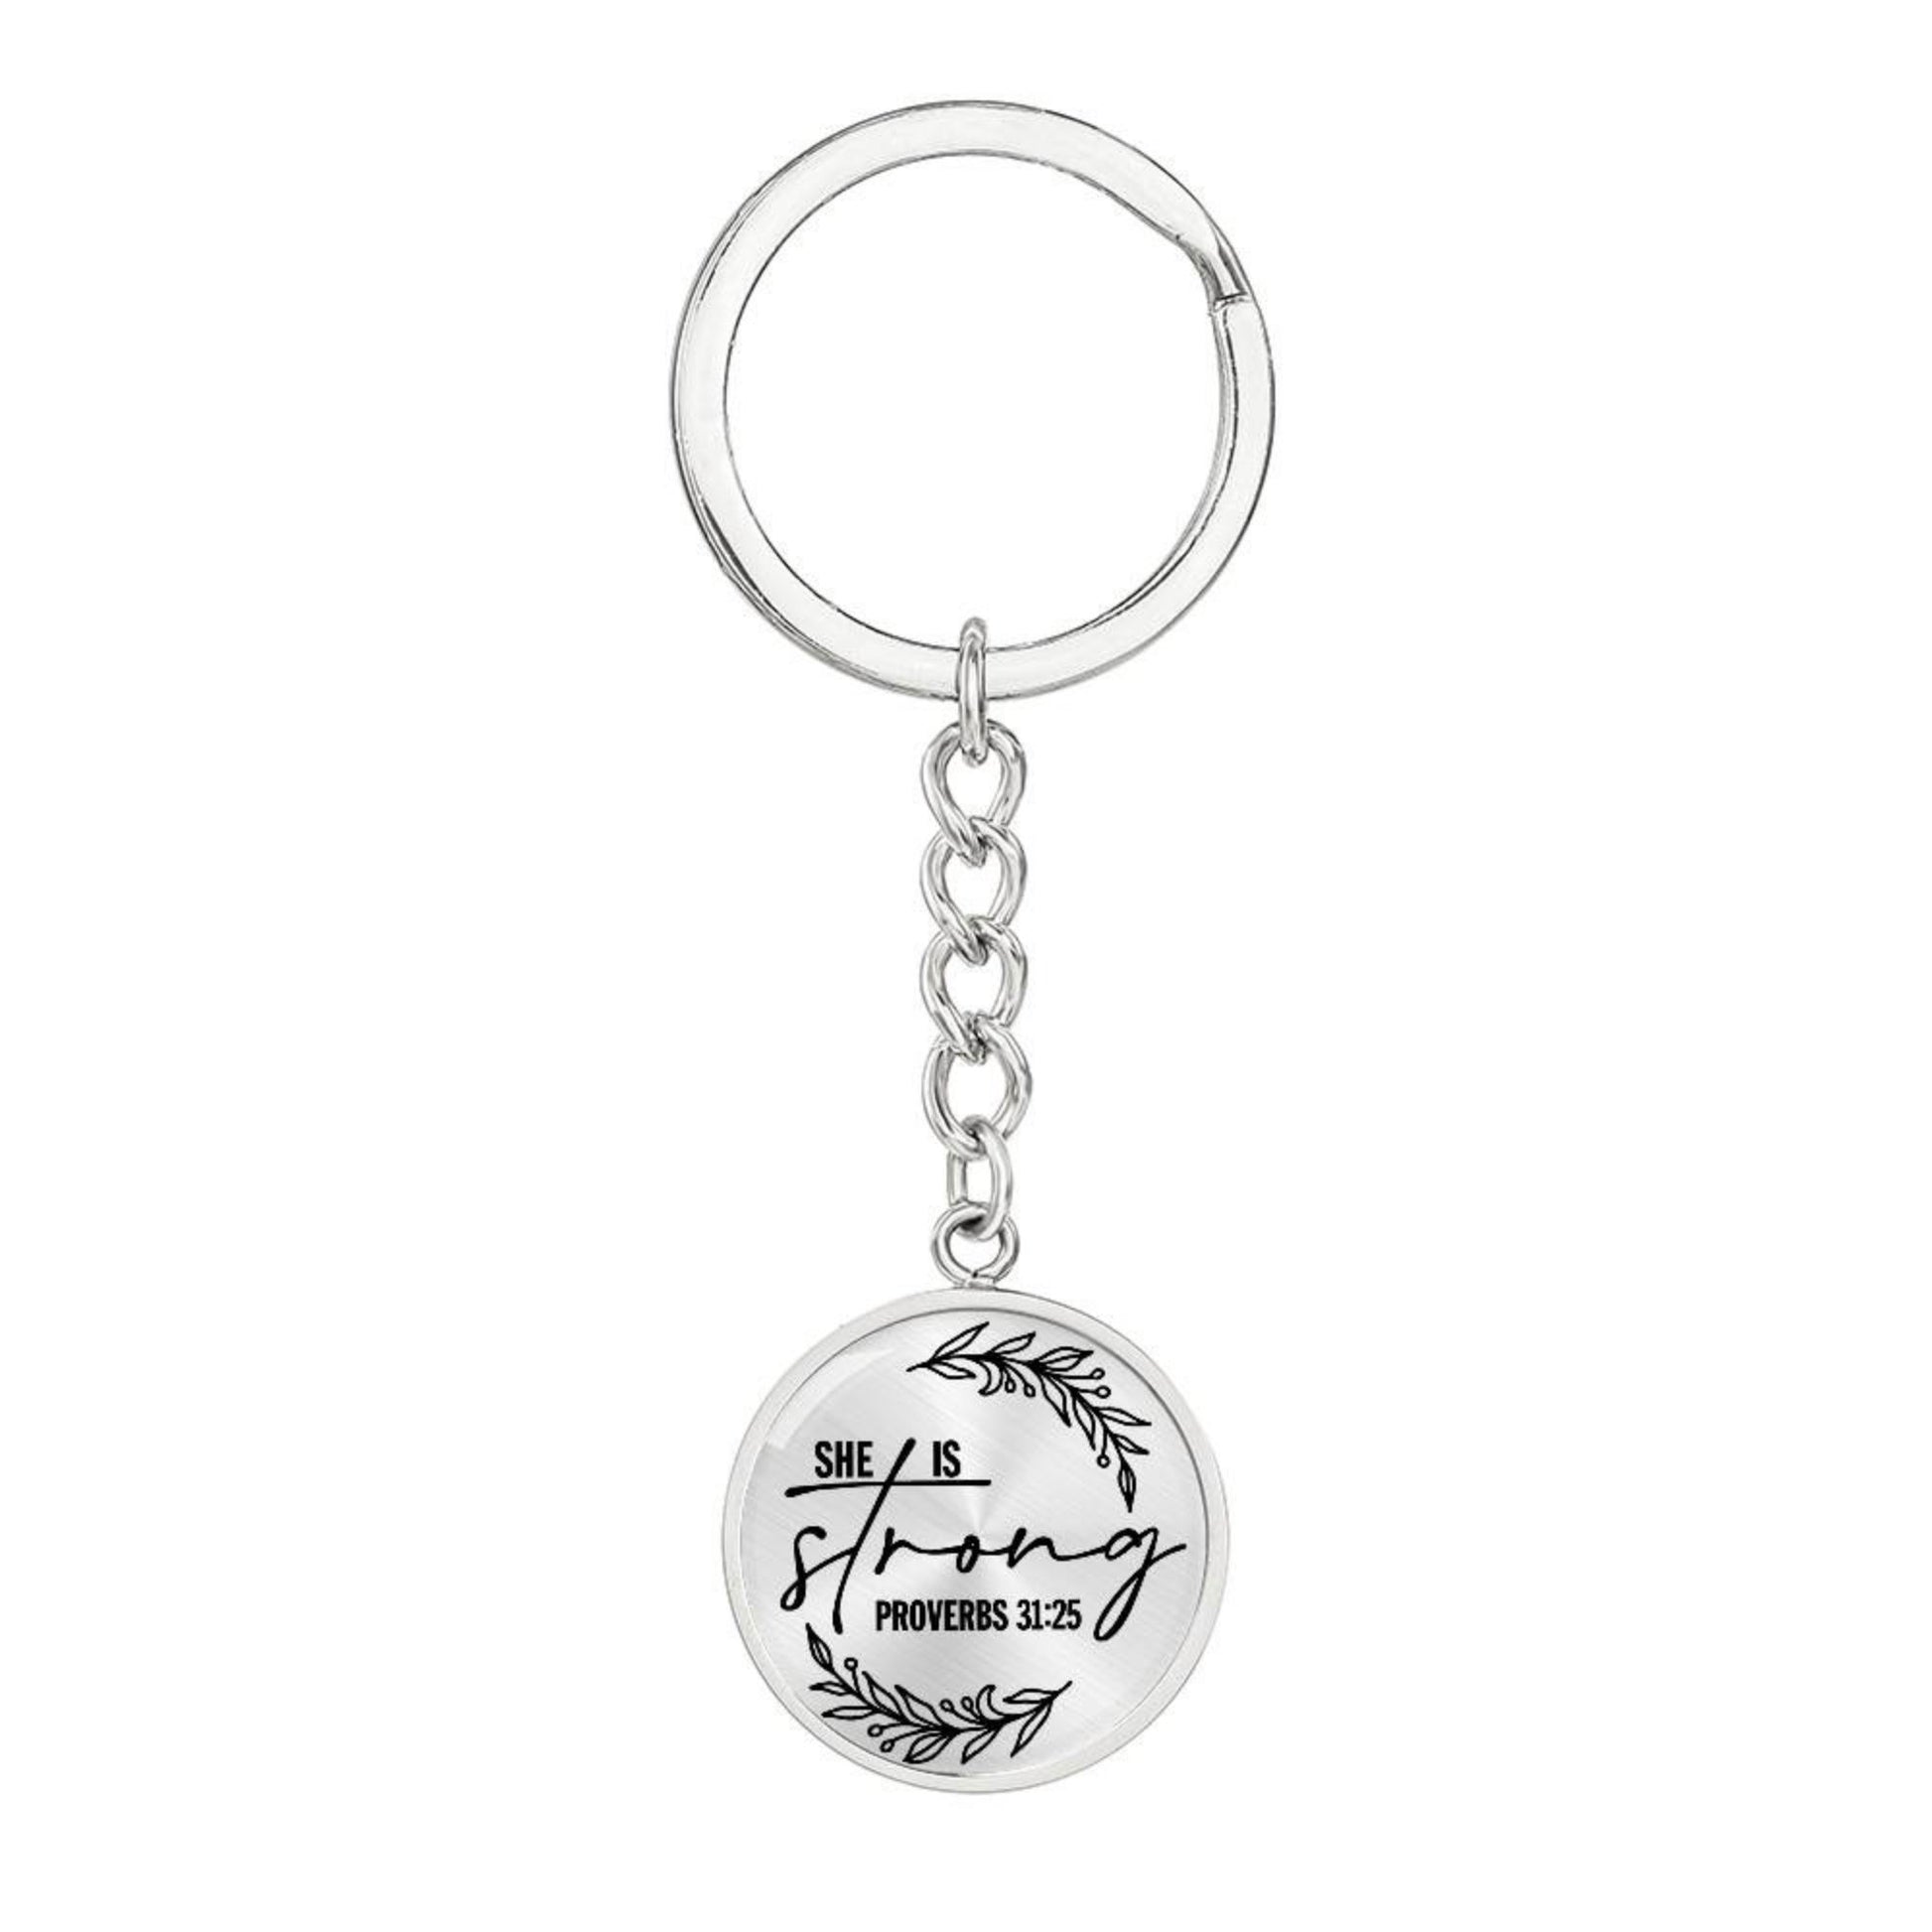 She is Strong Proverbs 31:25 Daily Encouragement Keychain Engraving: No Jesus Passion Apparel